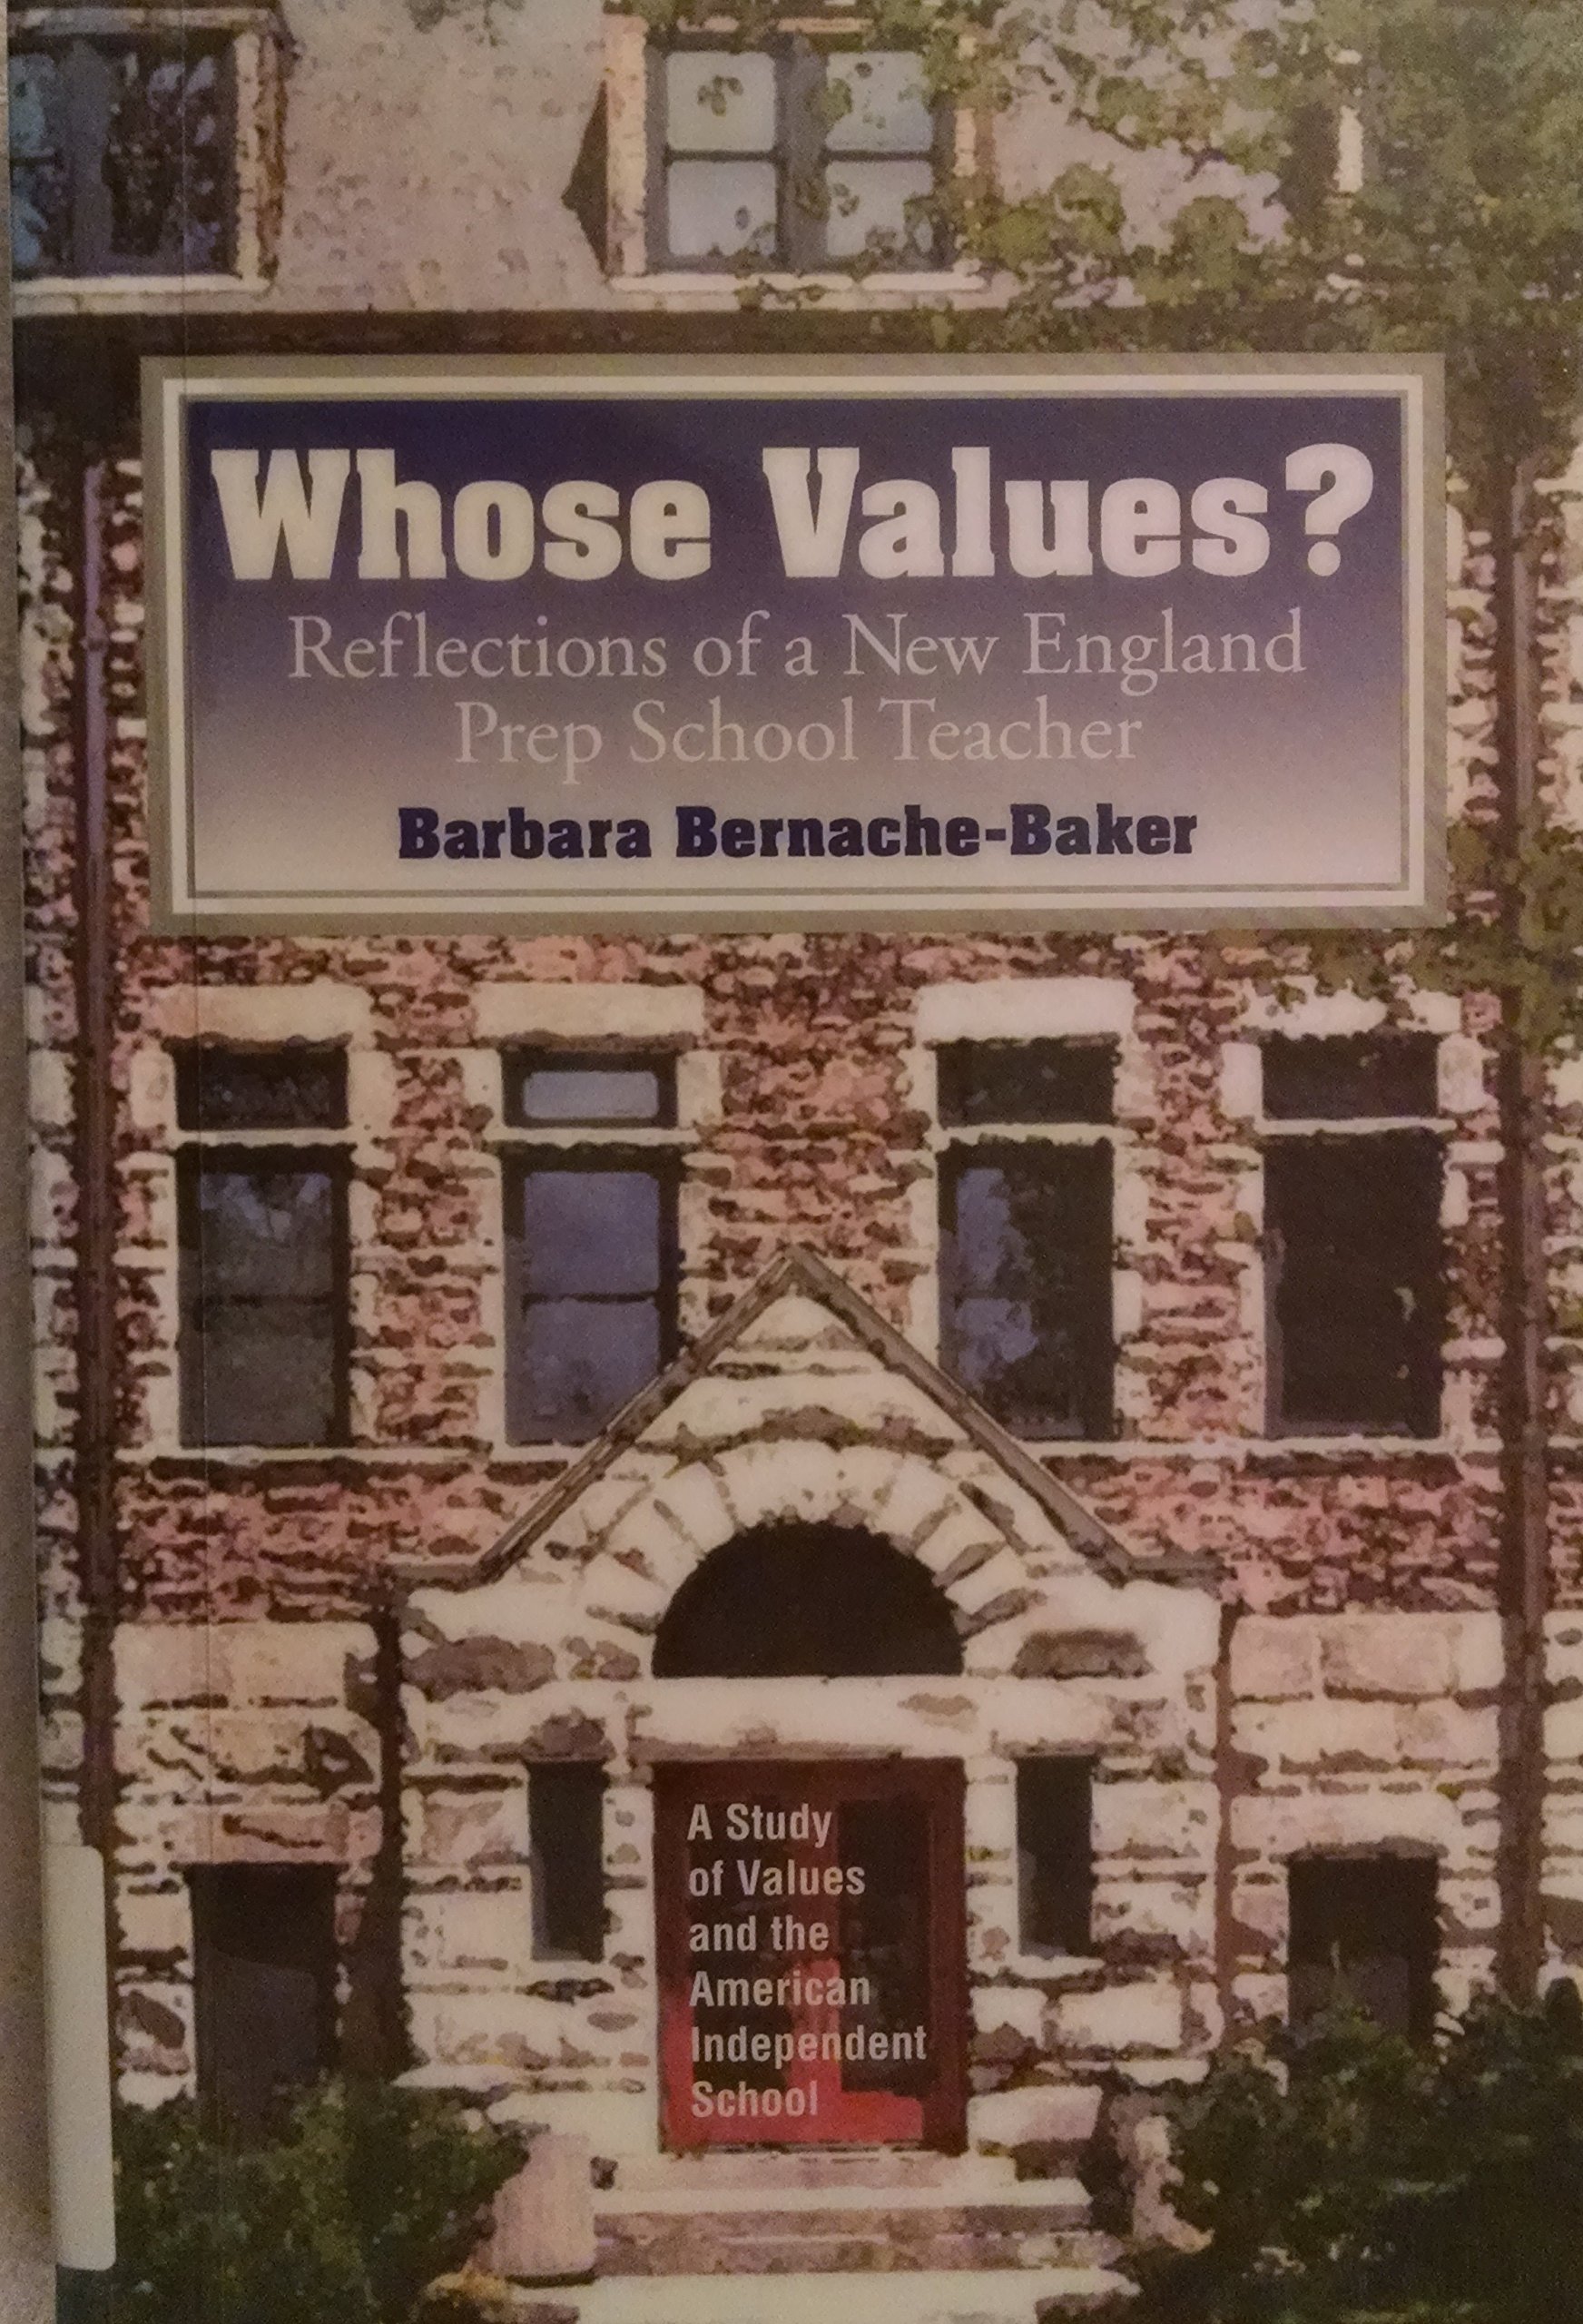 Whose values? : Reflections of a New England prep school teacher : a study of values and the American independent school